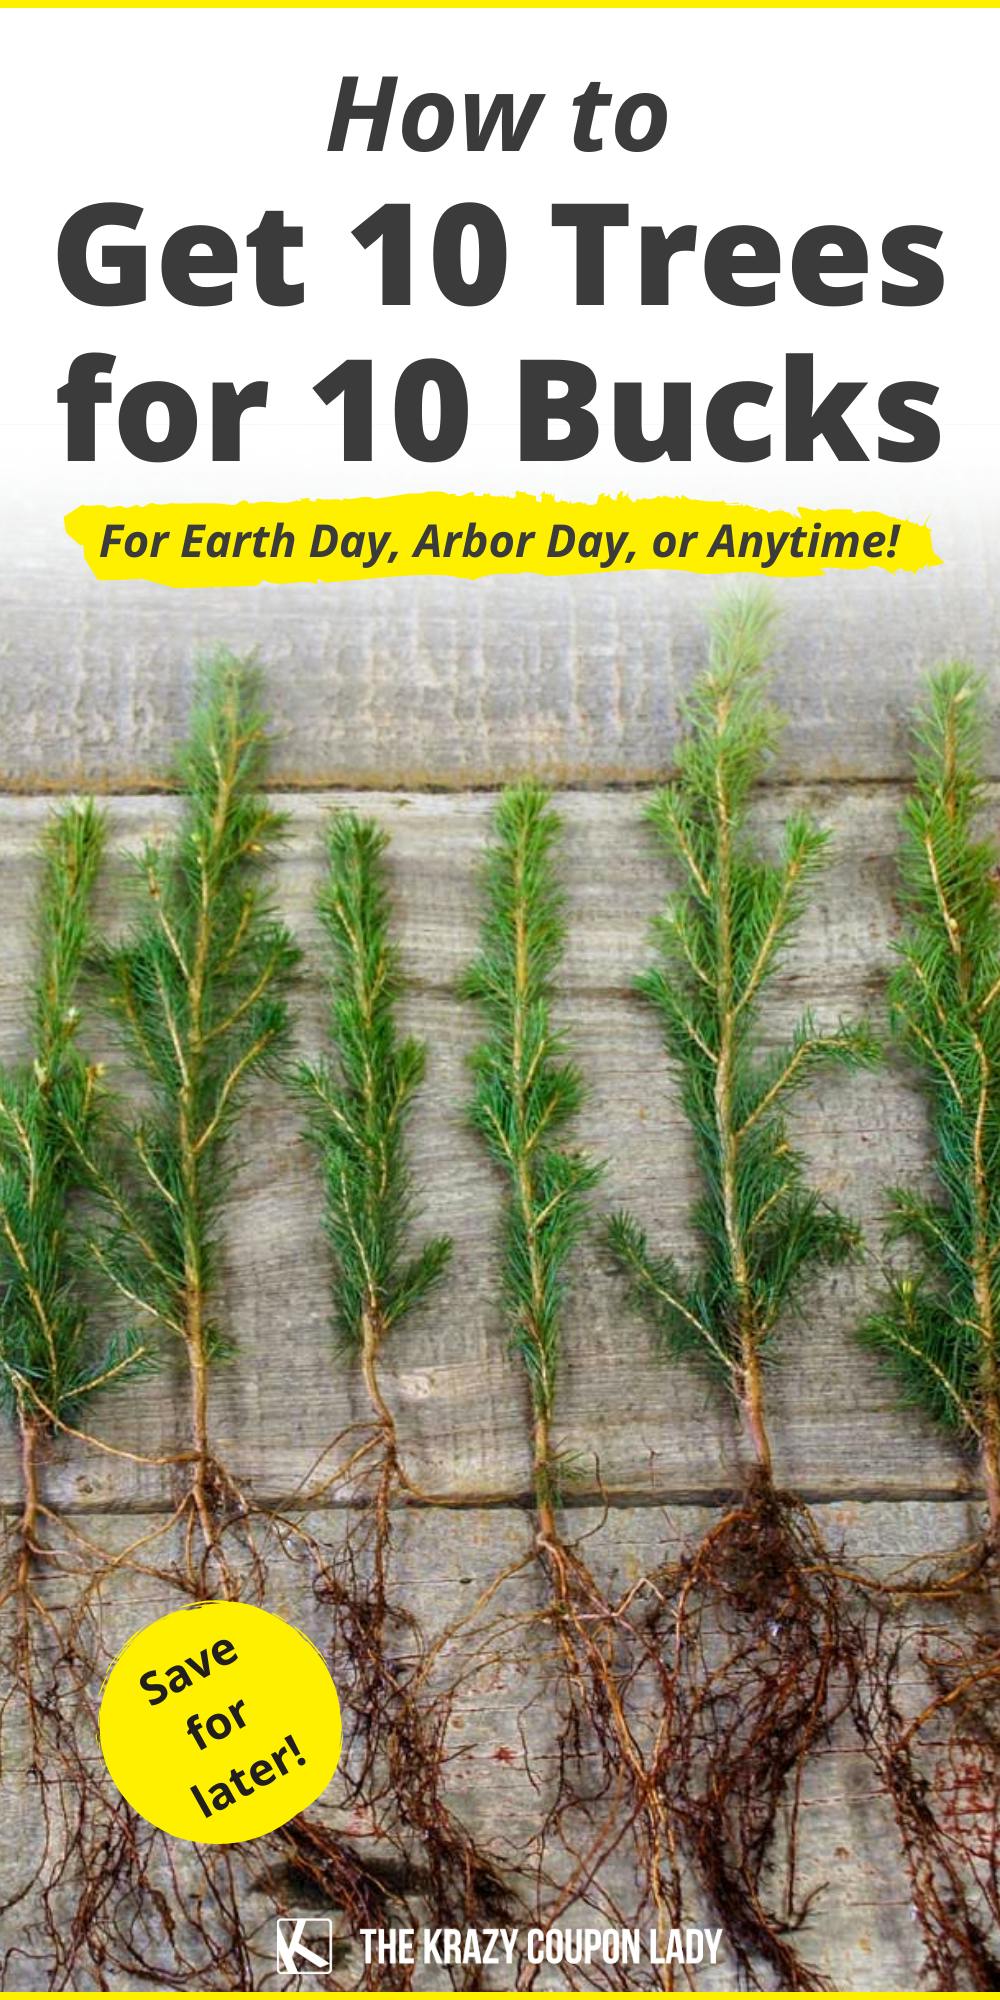 Get 10 Trees for $10 on Arbor Day (or Whenever)